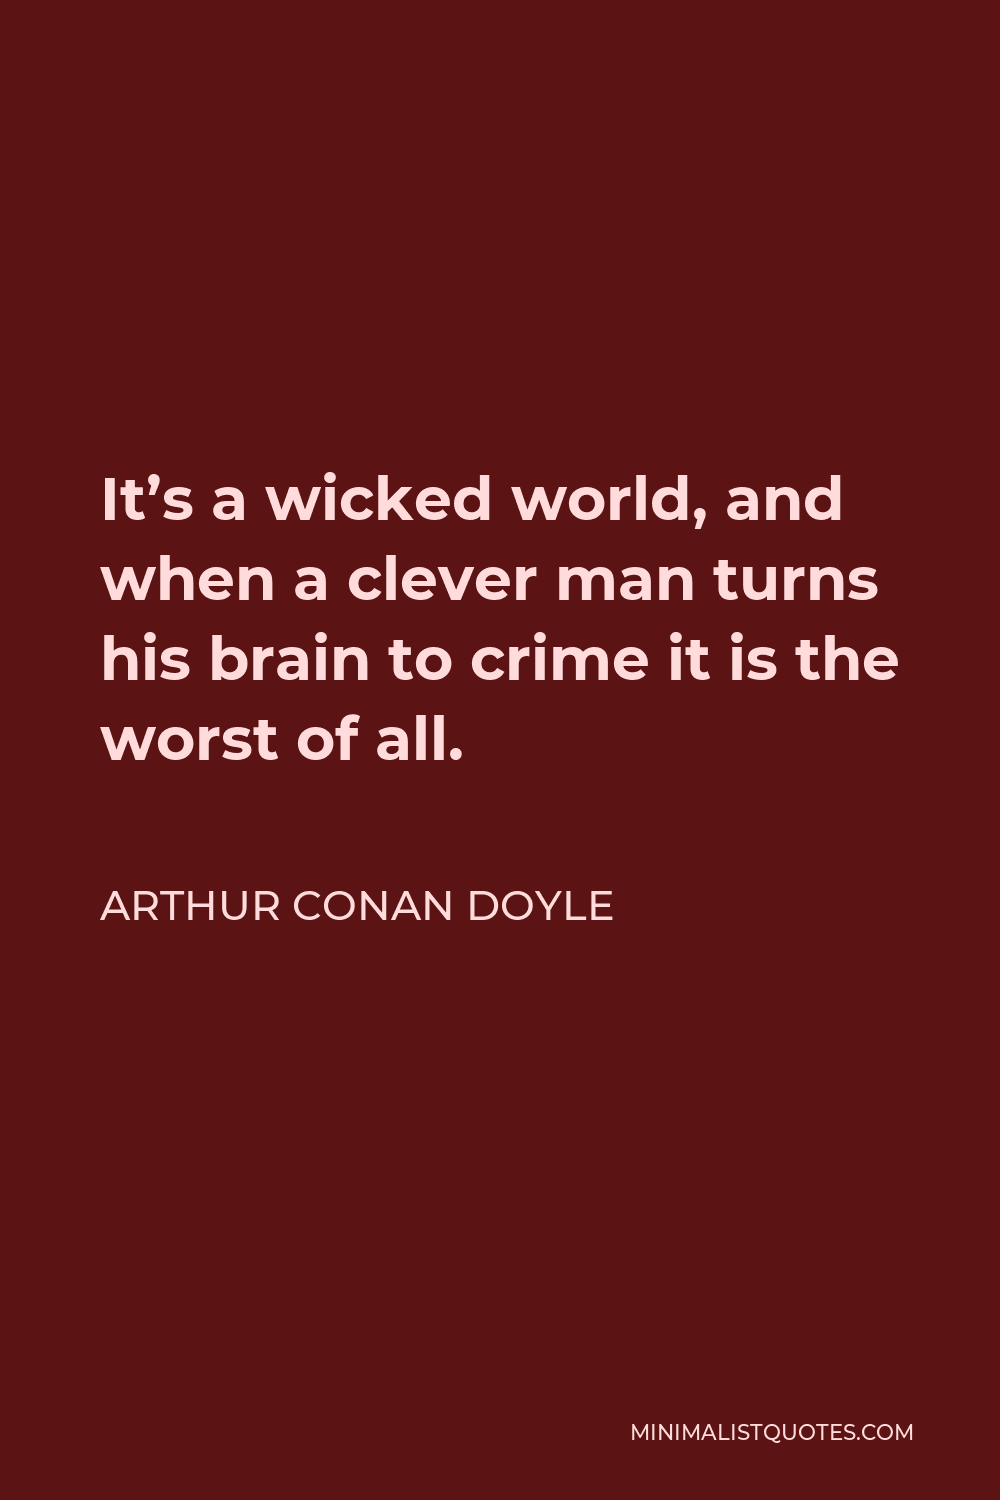 Arthur Conan Doyle Quote - It’s a wicked world, and when a clever man turns his brain to crime it is the worst of all.